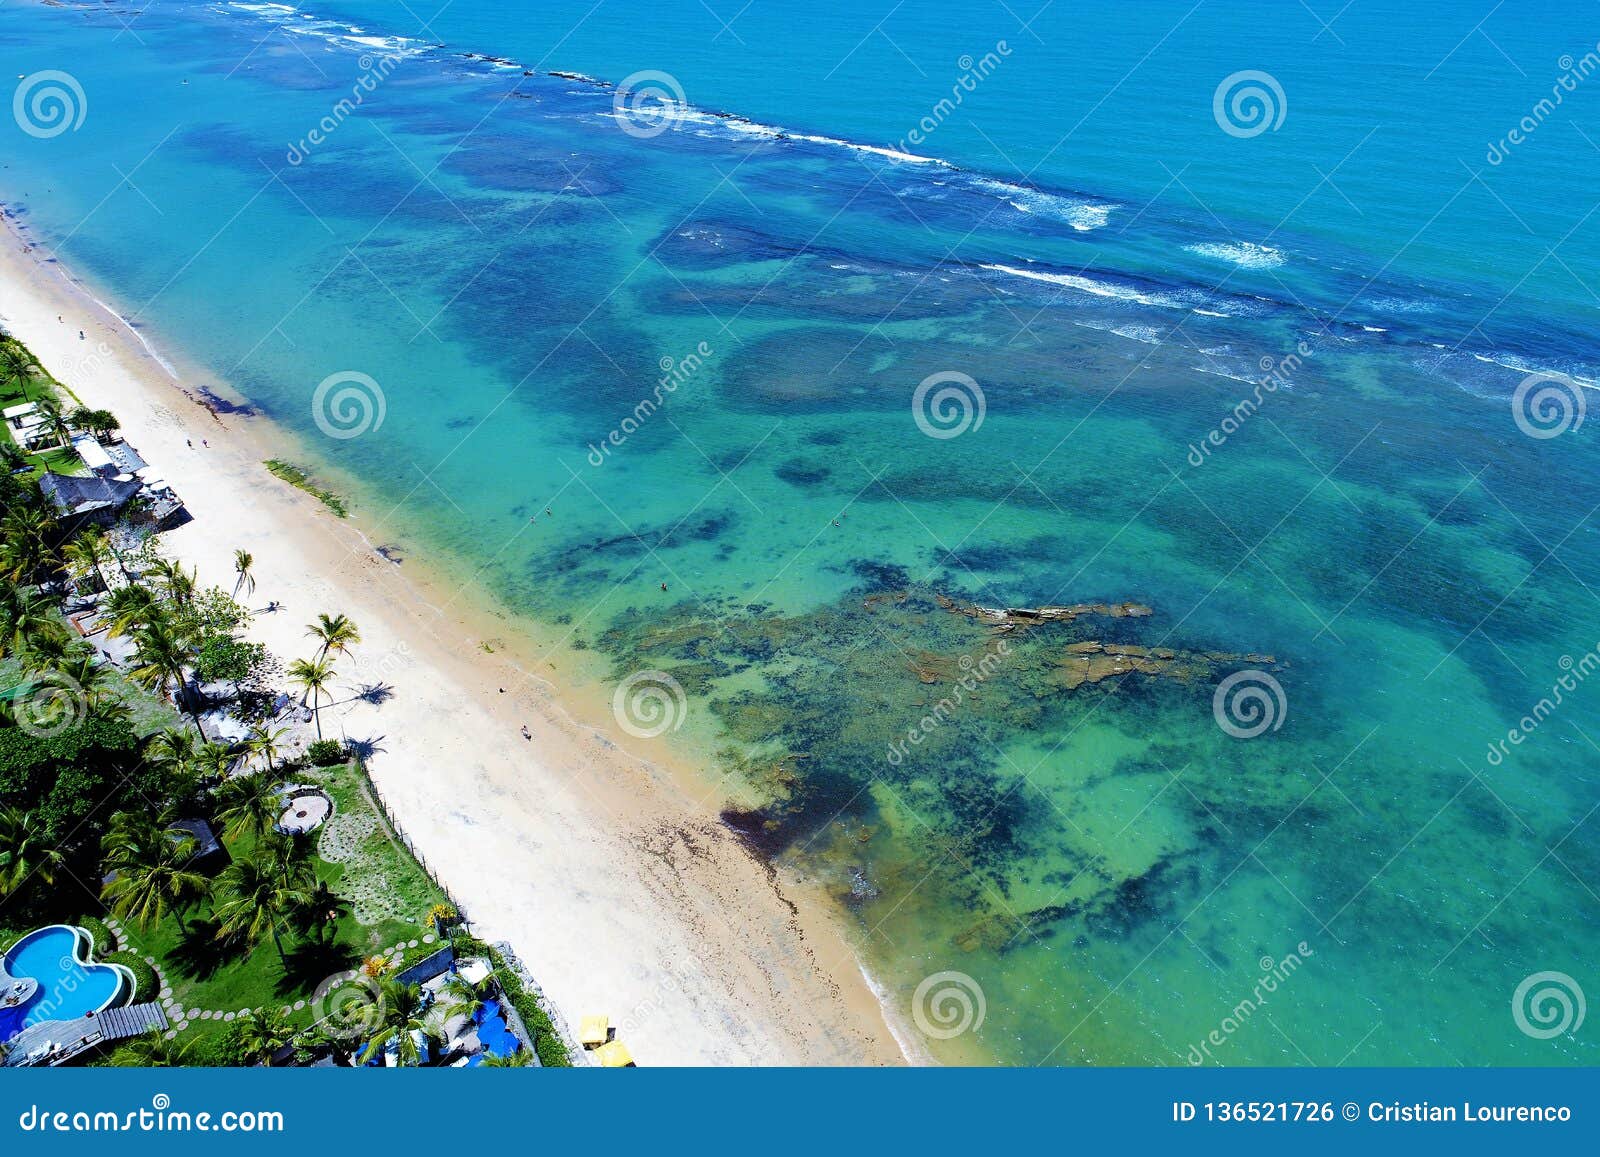 arraial d`ajuda, bahia, brazil: aerial view of a beautiful beach with two colors of water.